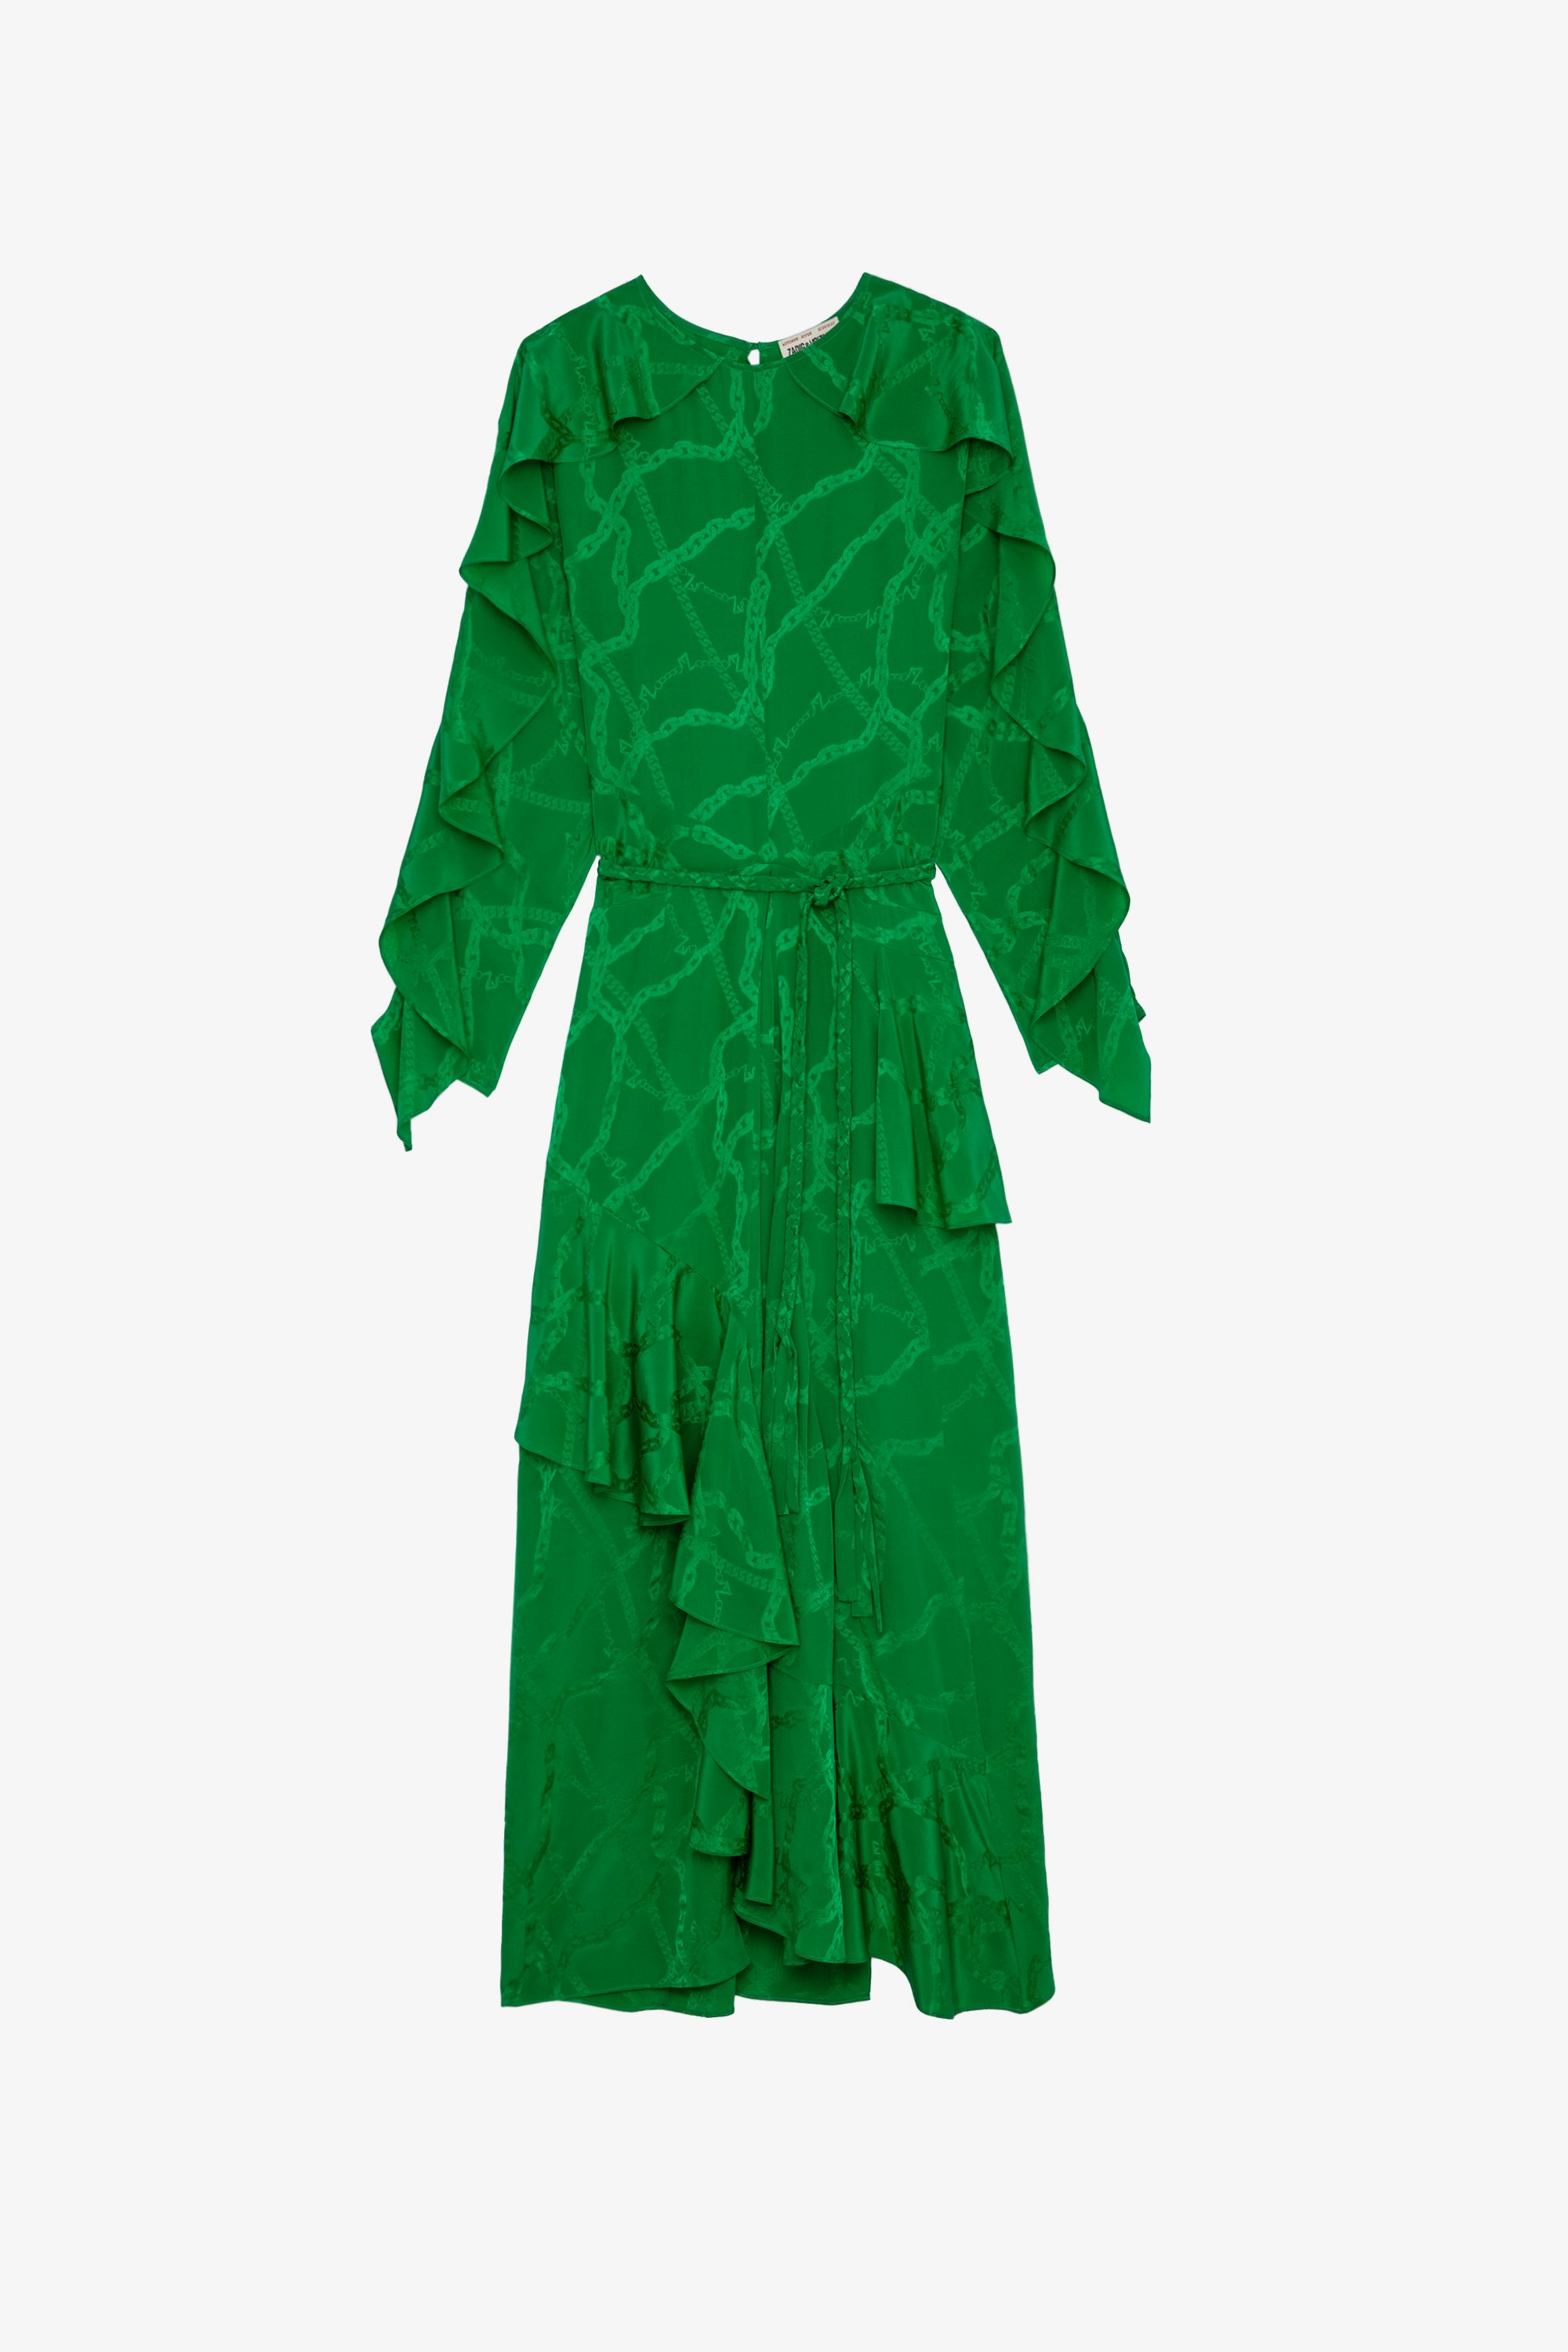 Ritana Chains Silk Dress Women’s long green silk dress with draped effect, decorated with jacquard ZV chains, tied with a braided belt at the waist 